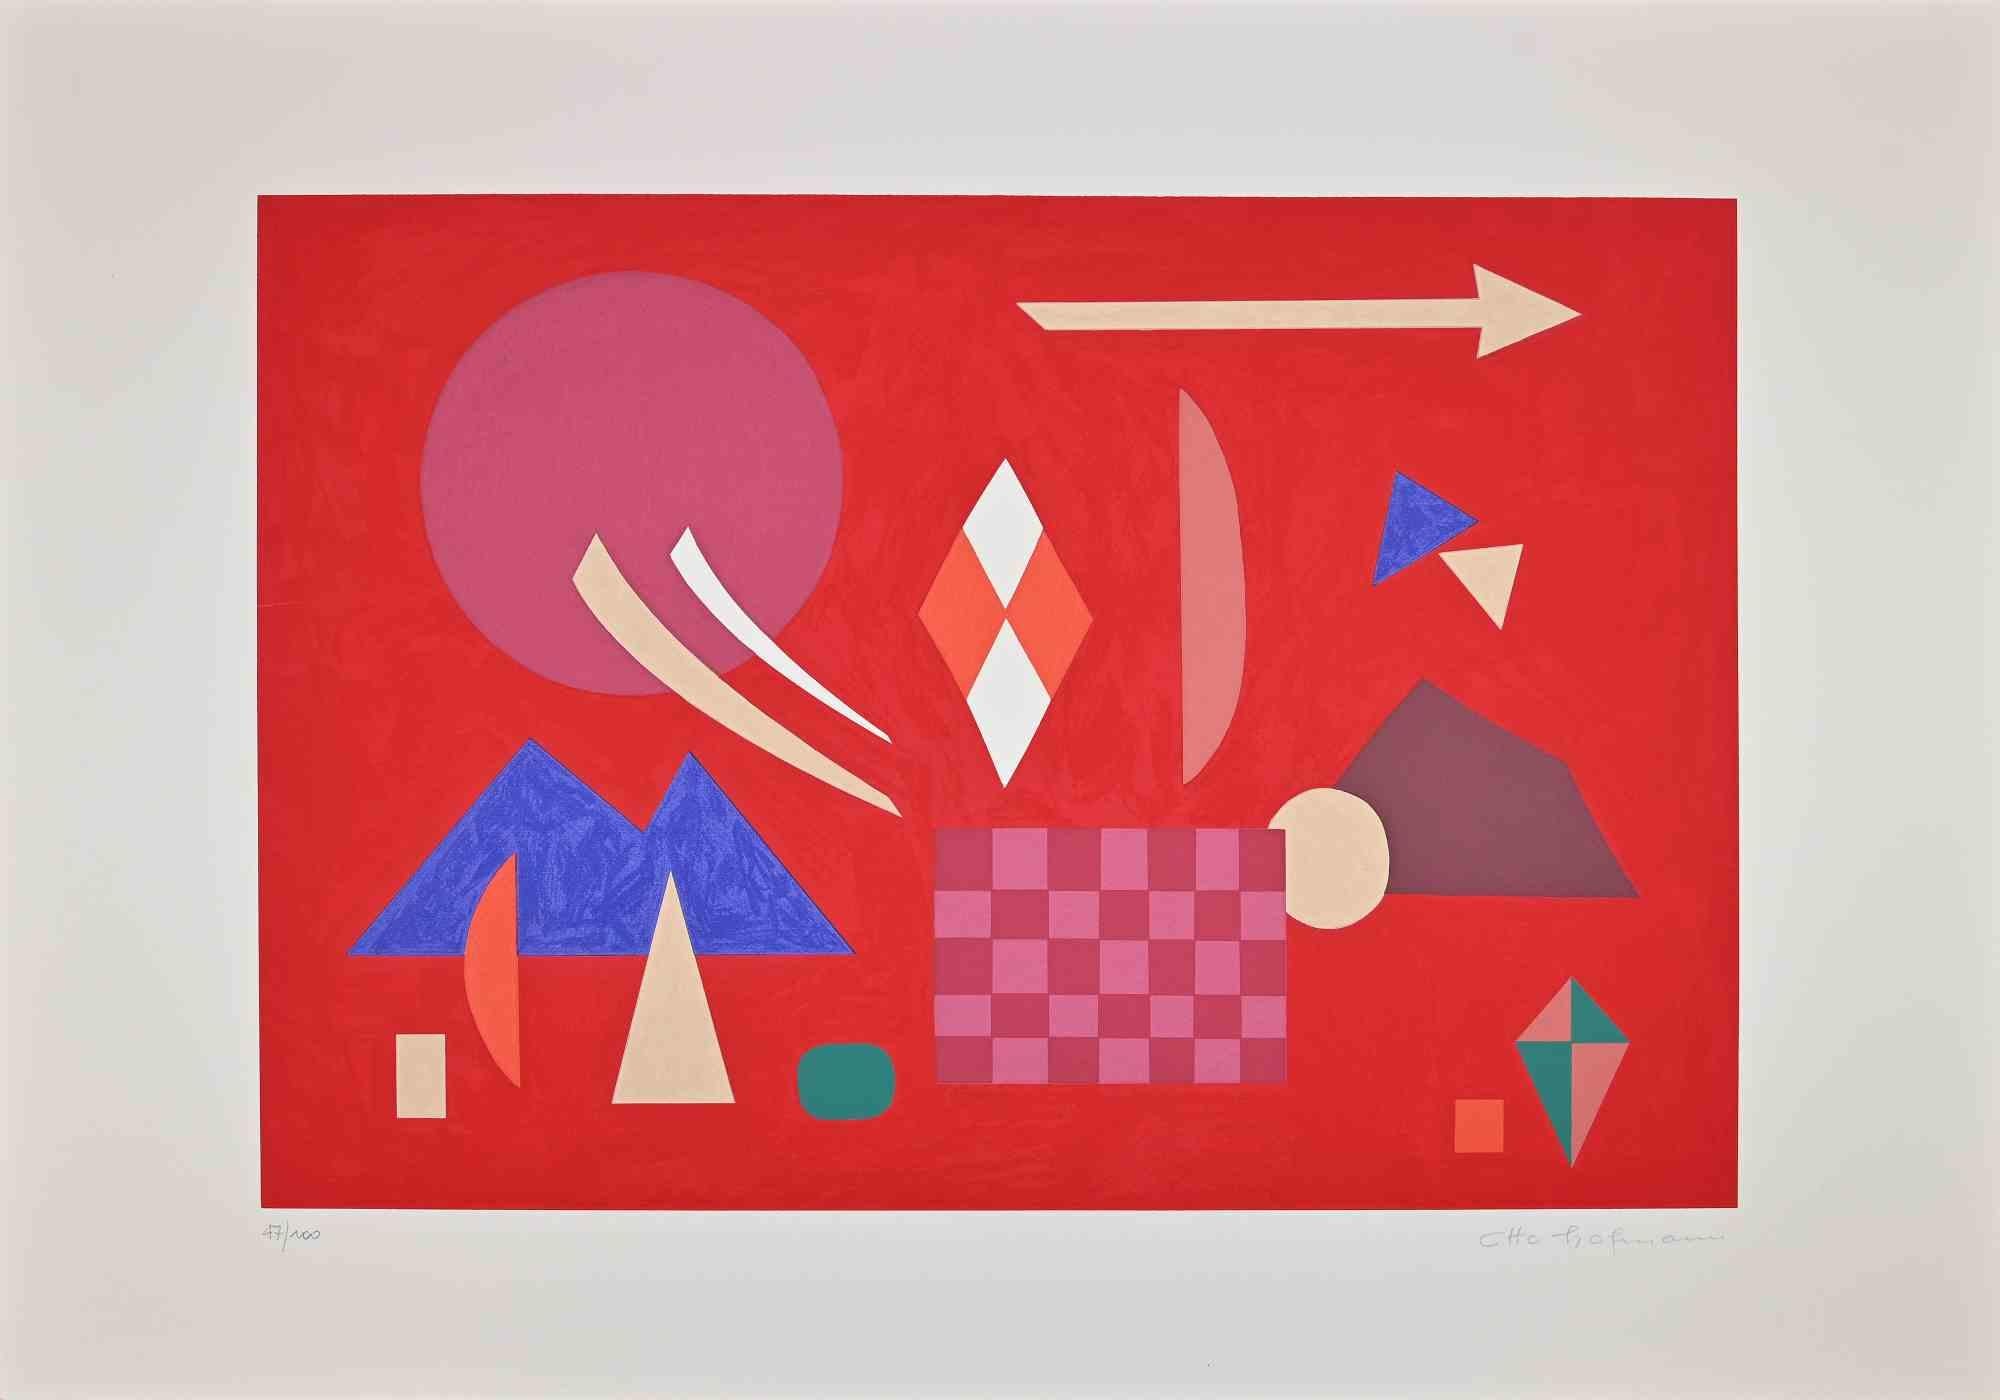 Red composition is an original contemporary artwork realized by Otto Hofmann in 1989.

Mixed colored screen print.

Hand signed on the lower right margin.

Numbered on the lower left. Edition of 47/100.

The artwork is from a potfolio edited by